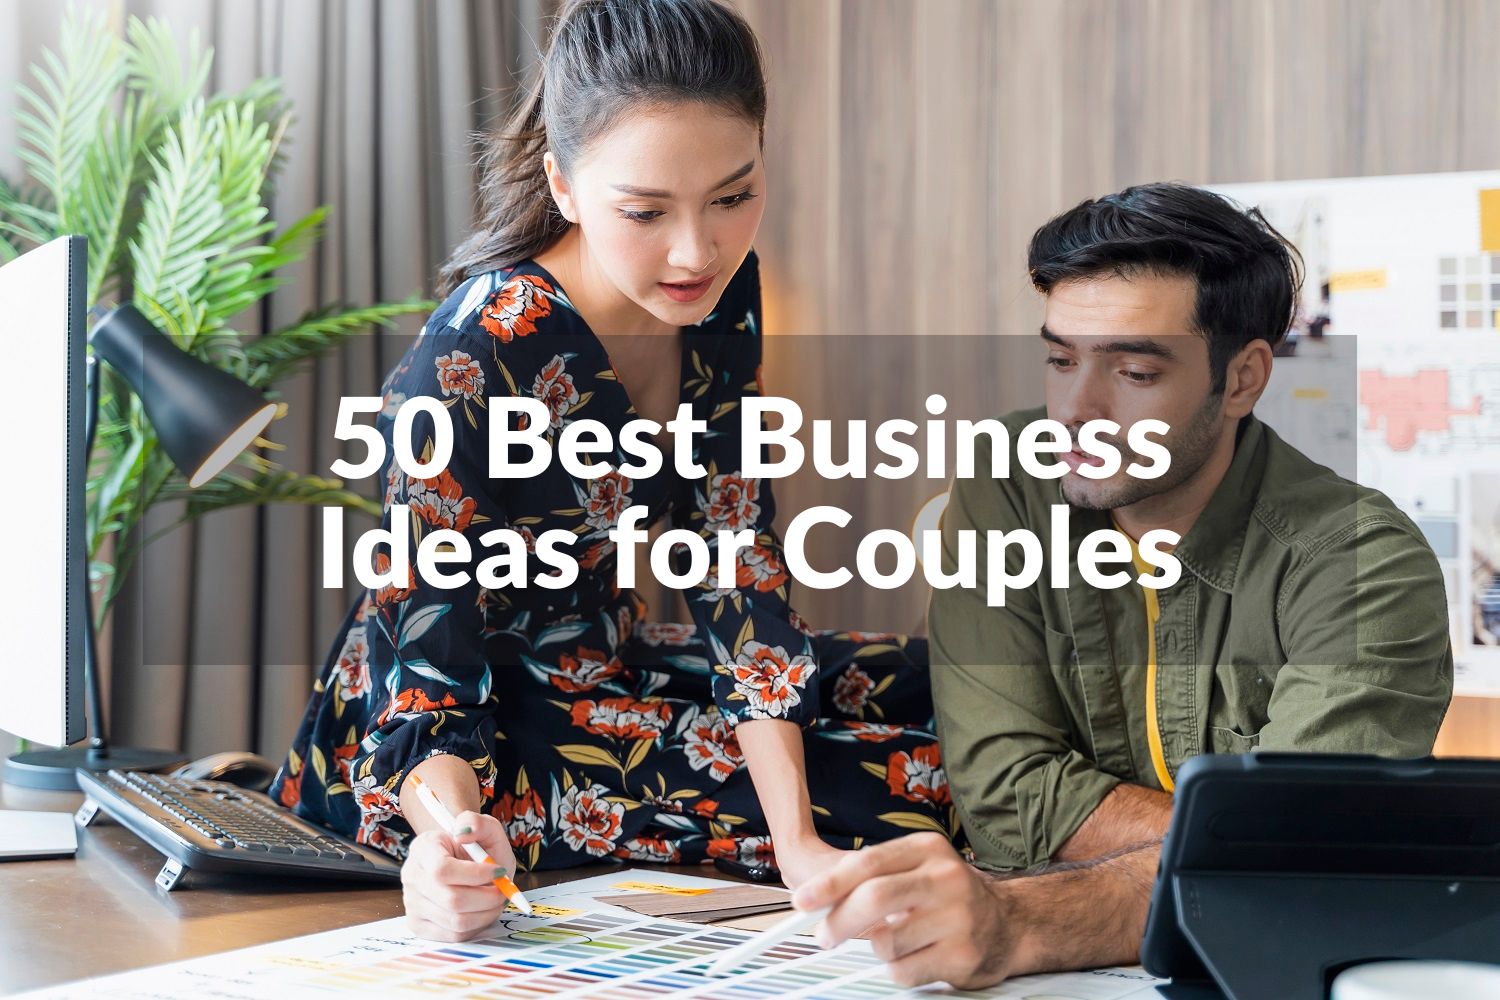 Best Business Ideas for Couples